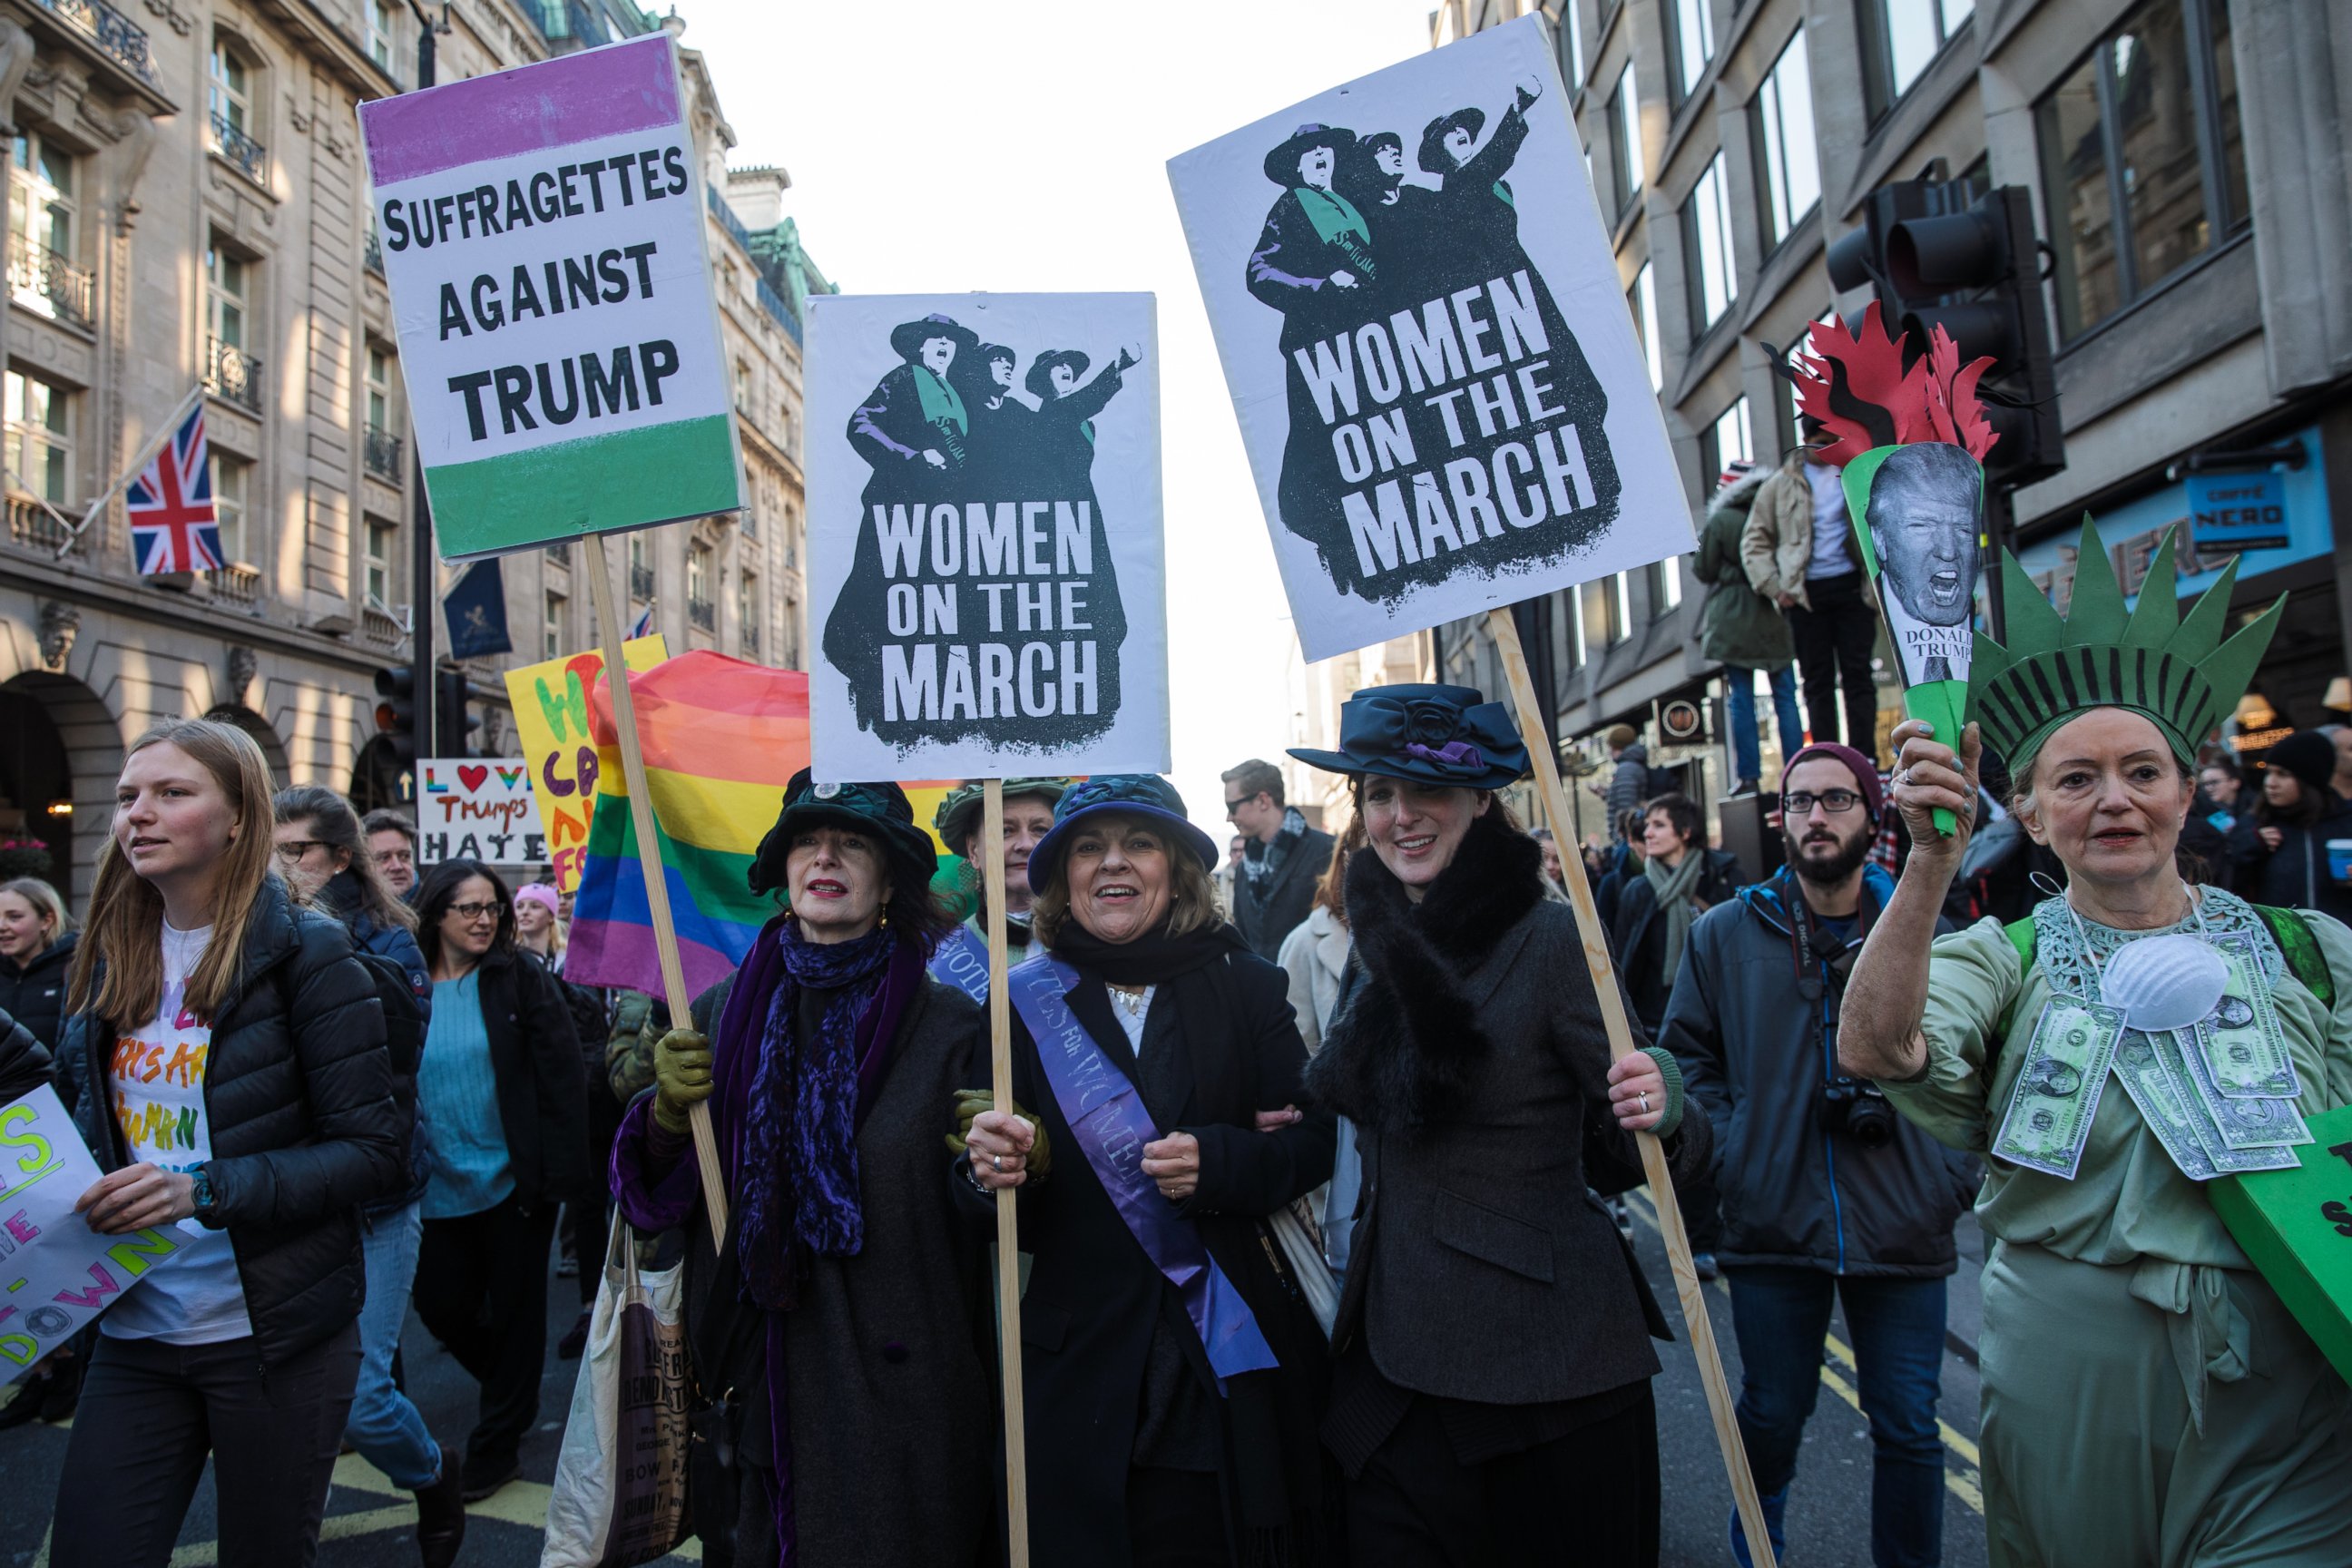 PHOTO: Protesters in costume holding placards march from The US Embassy in Grosvenor Square towards Trafalgar Square during the Women's March, Jan. 21, 2017, in London, England.